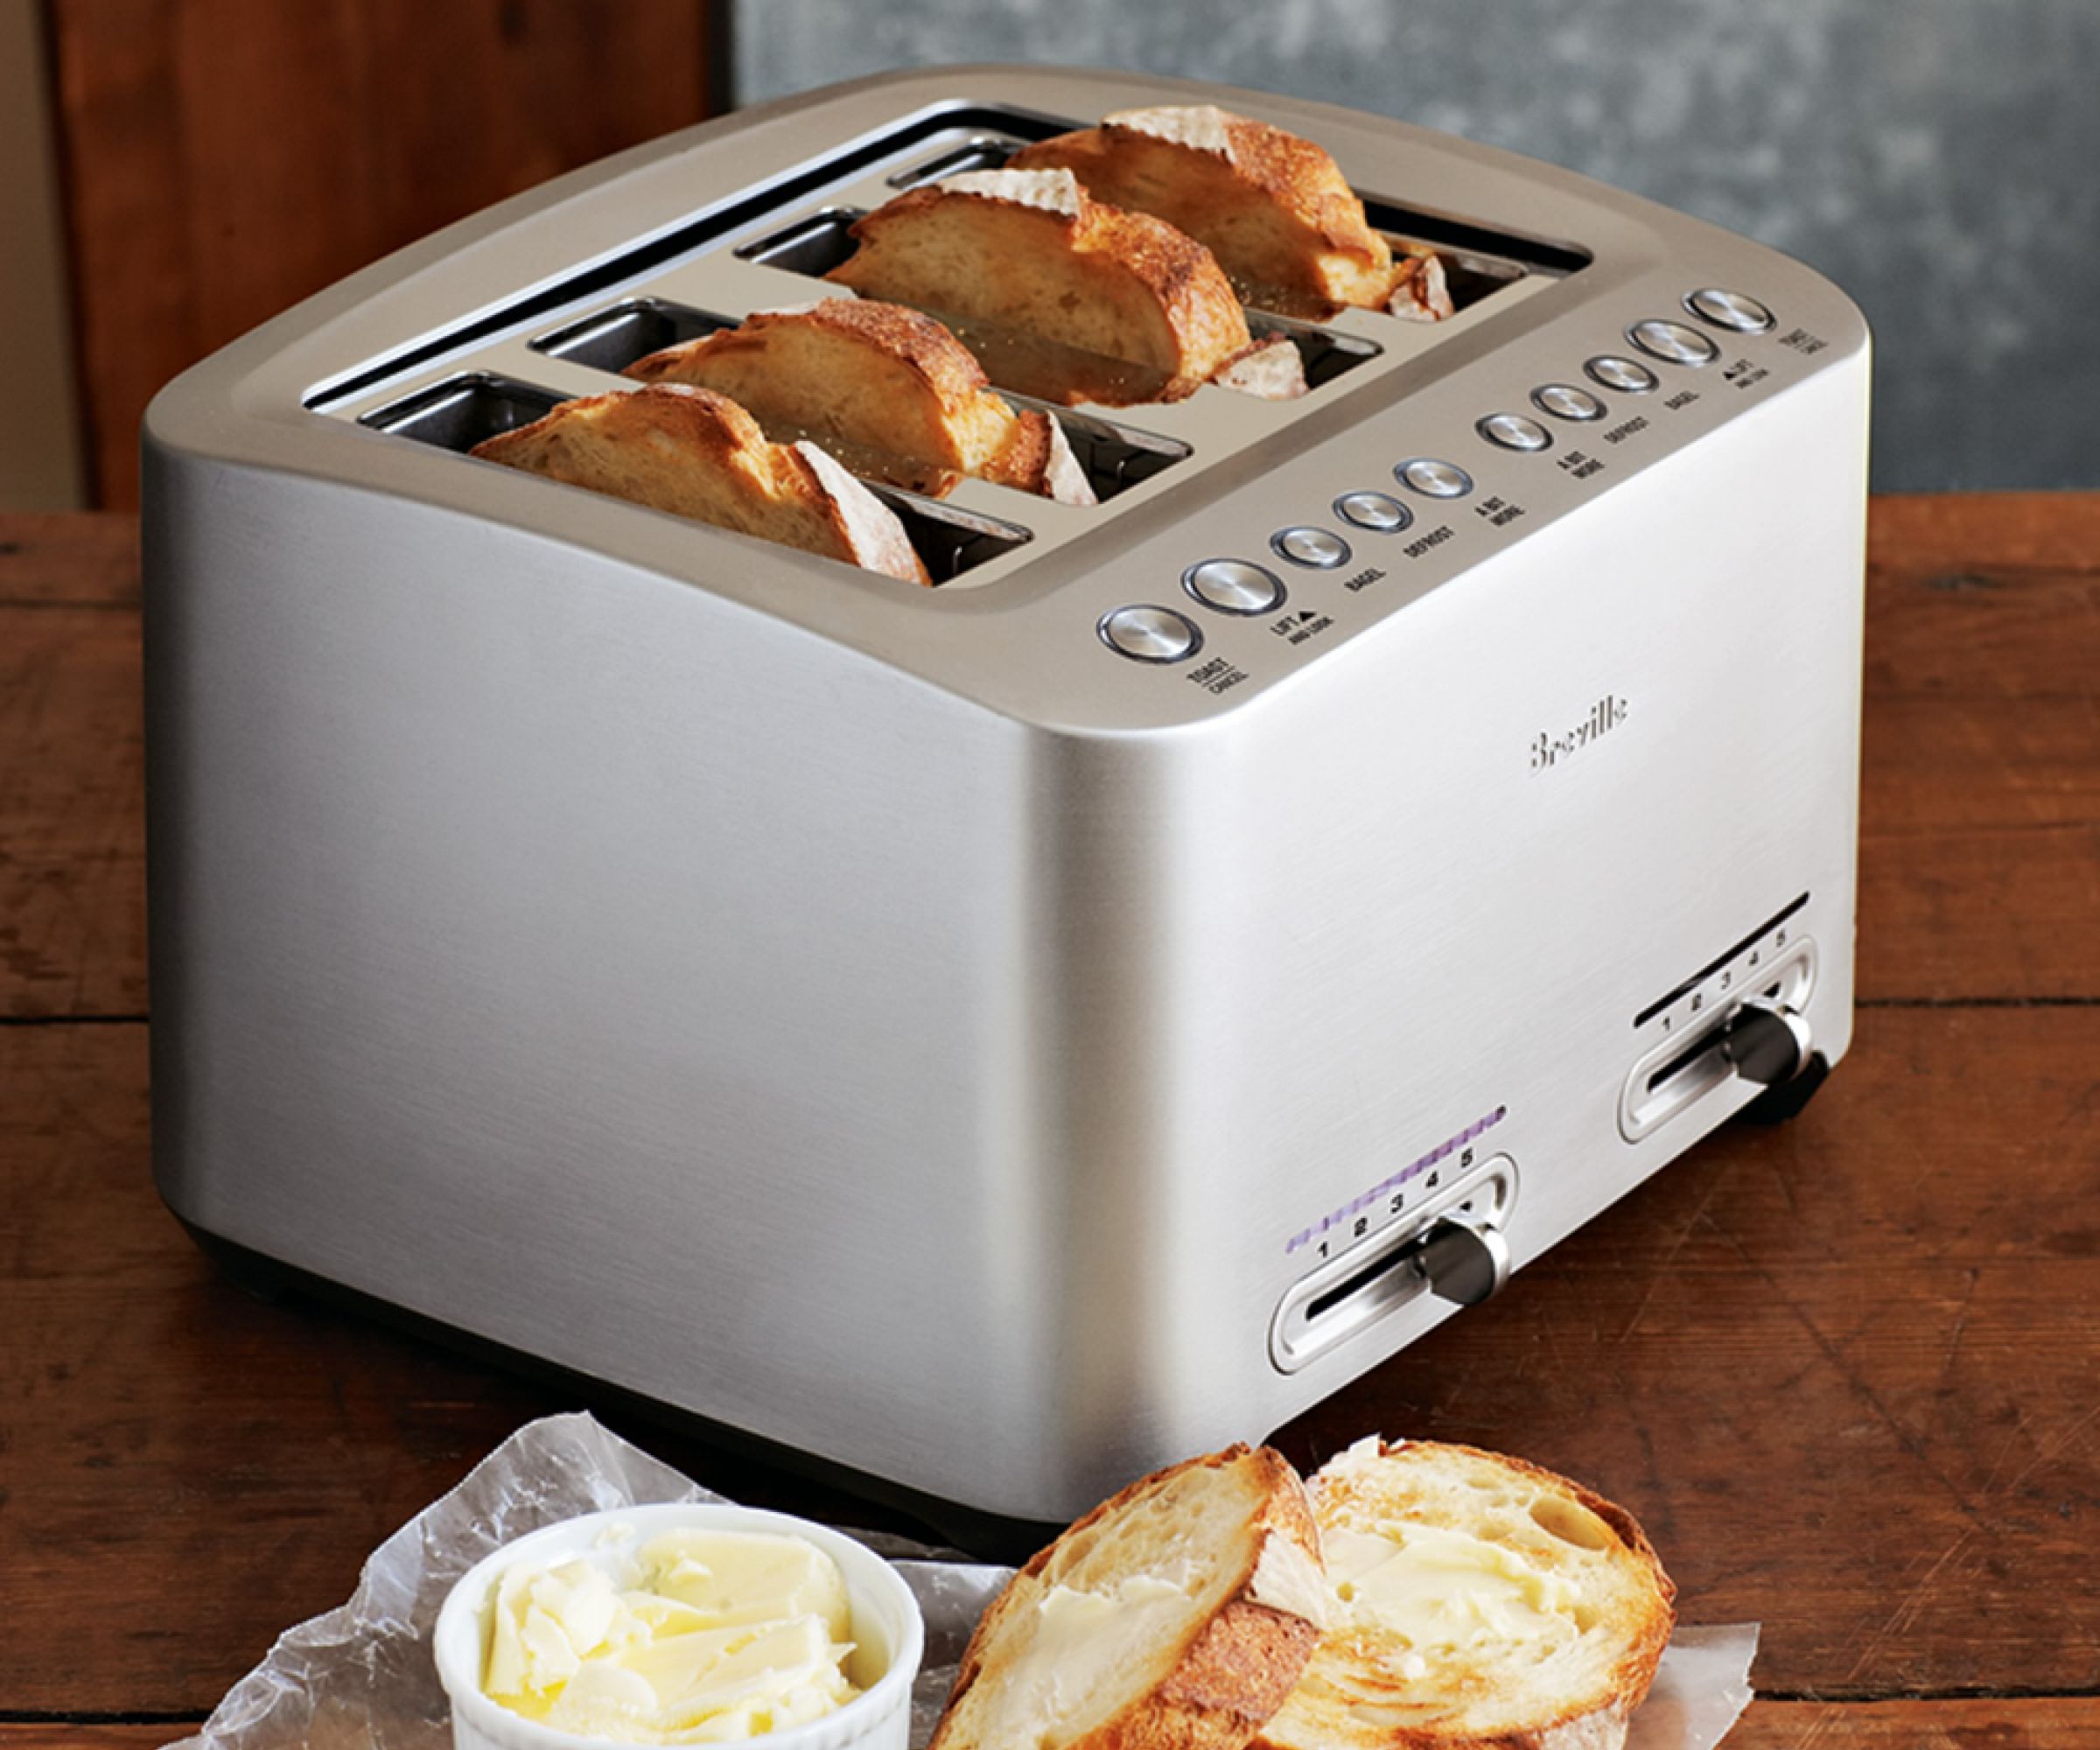 A Breville Die Cast 4-Slice Toaster with artisan bread and butter